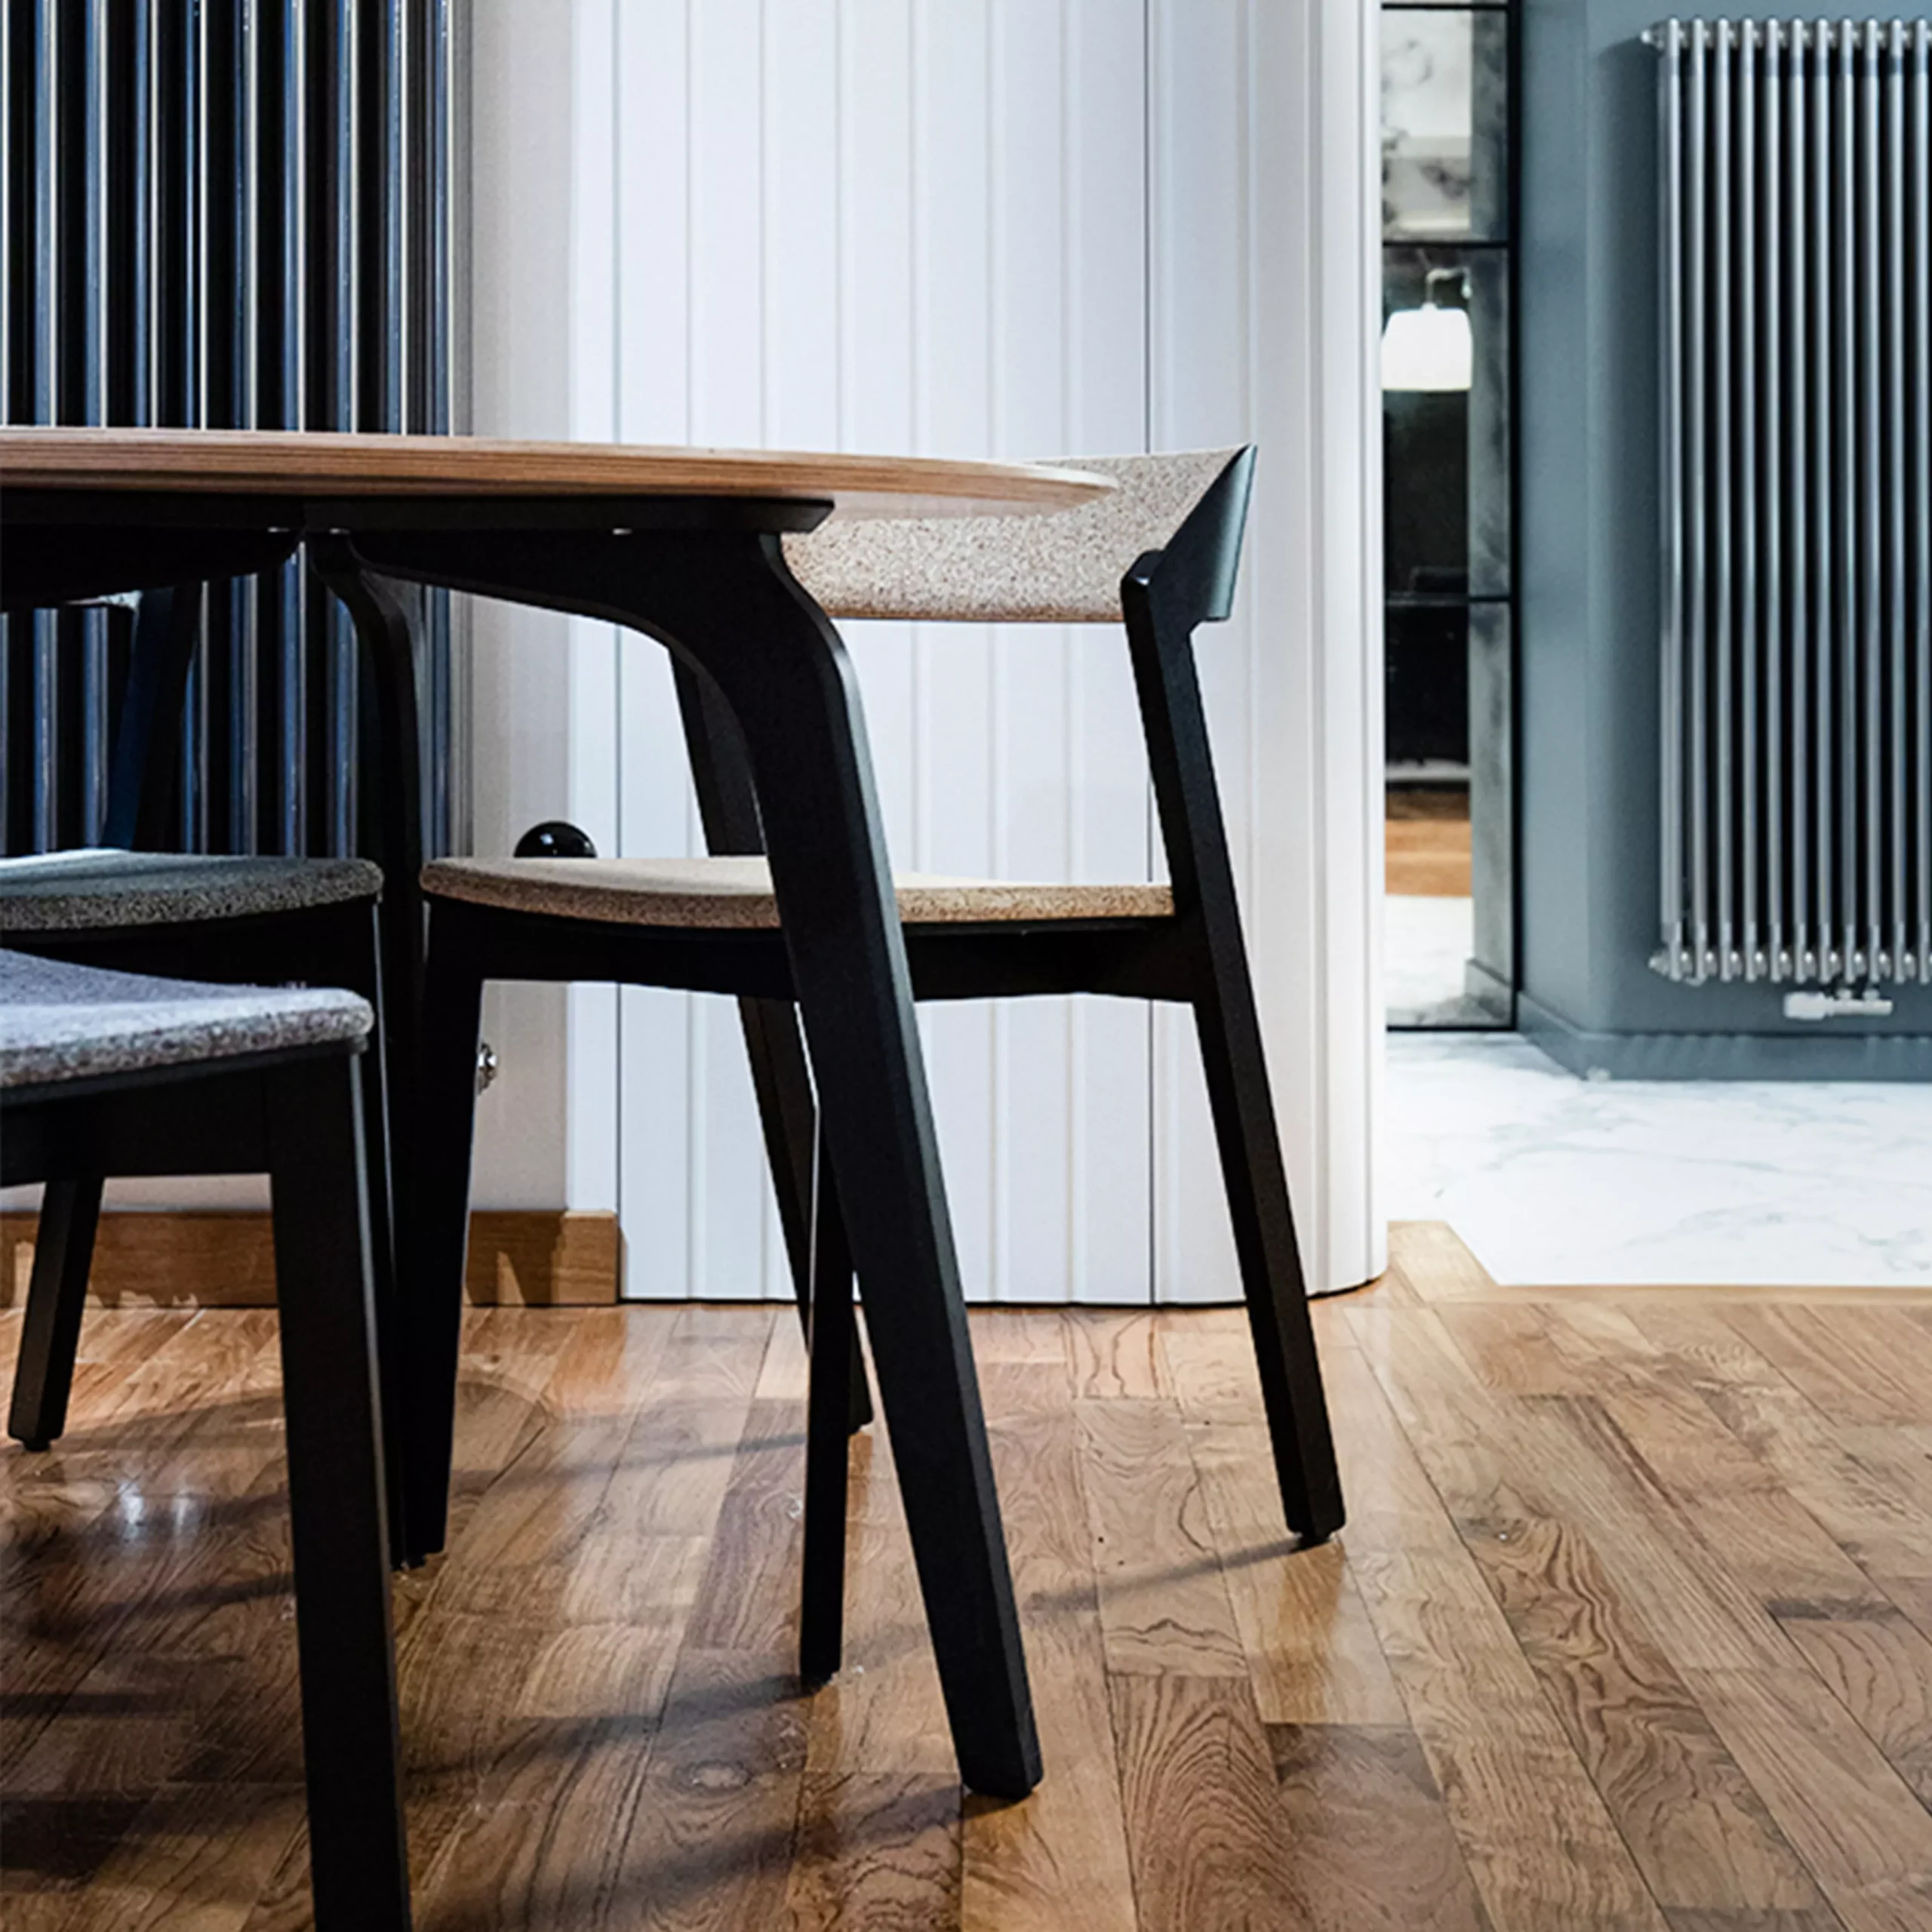 Round 100 Table in the finish: table top lacquered matt oak, base & legs lacquered matt black